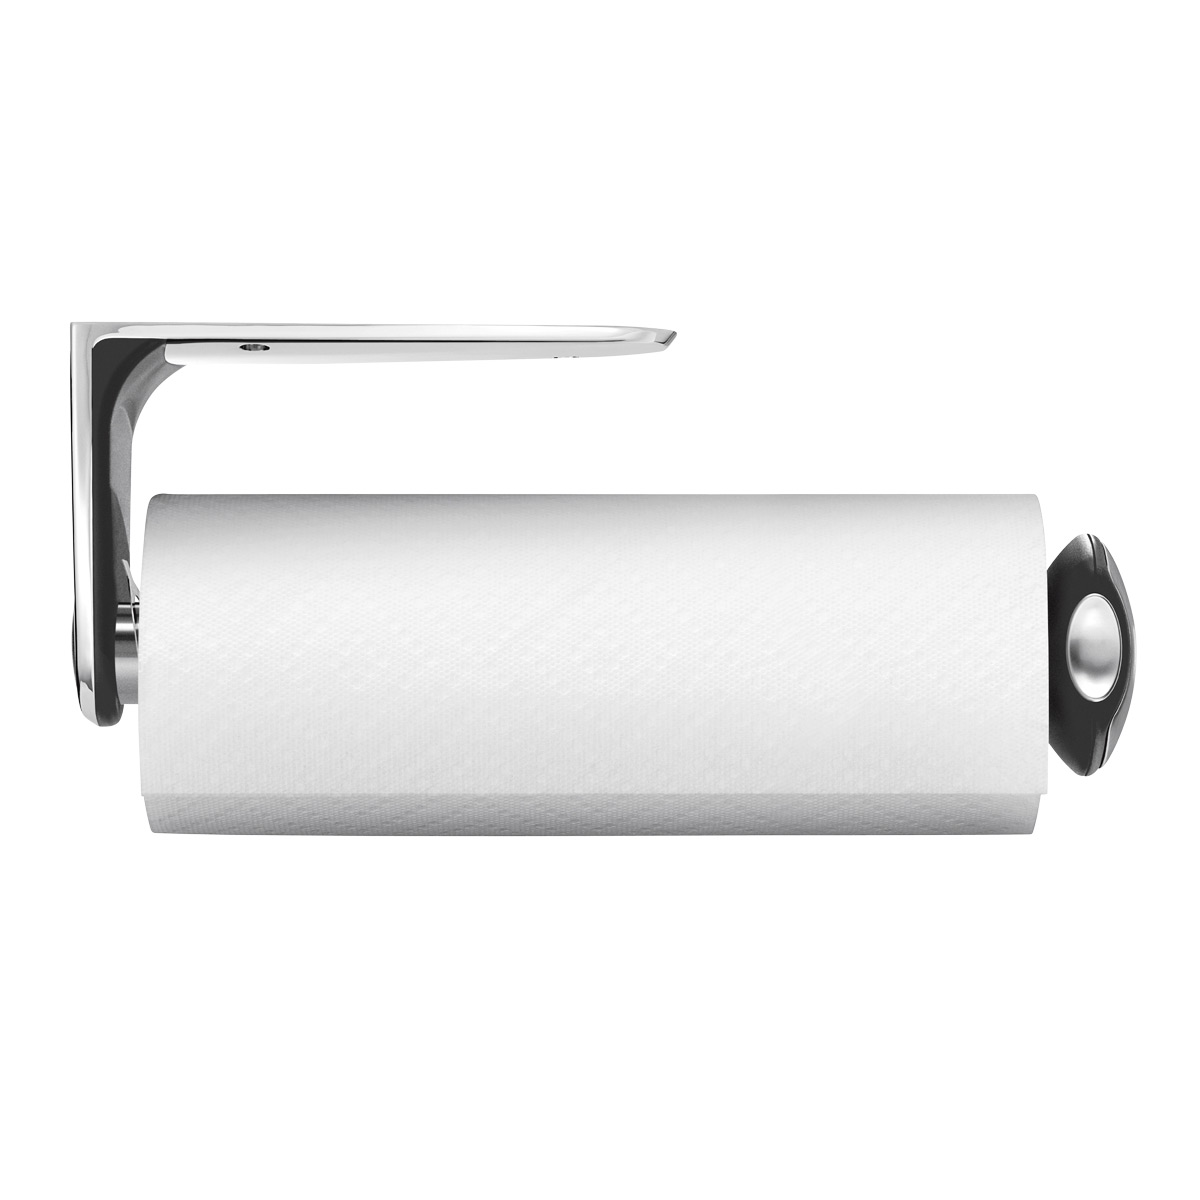 Pantula Paper Towel Holder Wall Mount - 3M Adhesive Paper Towel Rack  Dispenser Under Cabinet, No Drilling and Screws for Easy